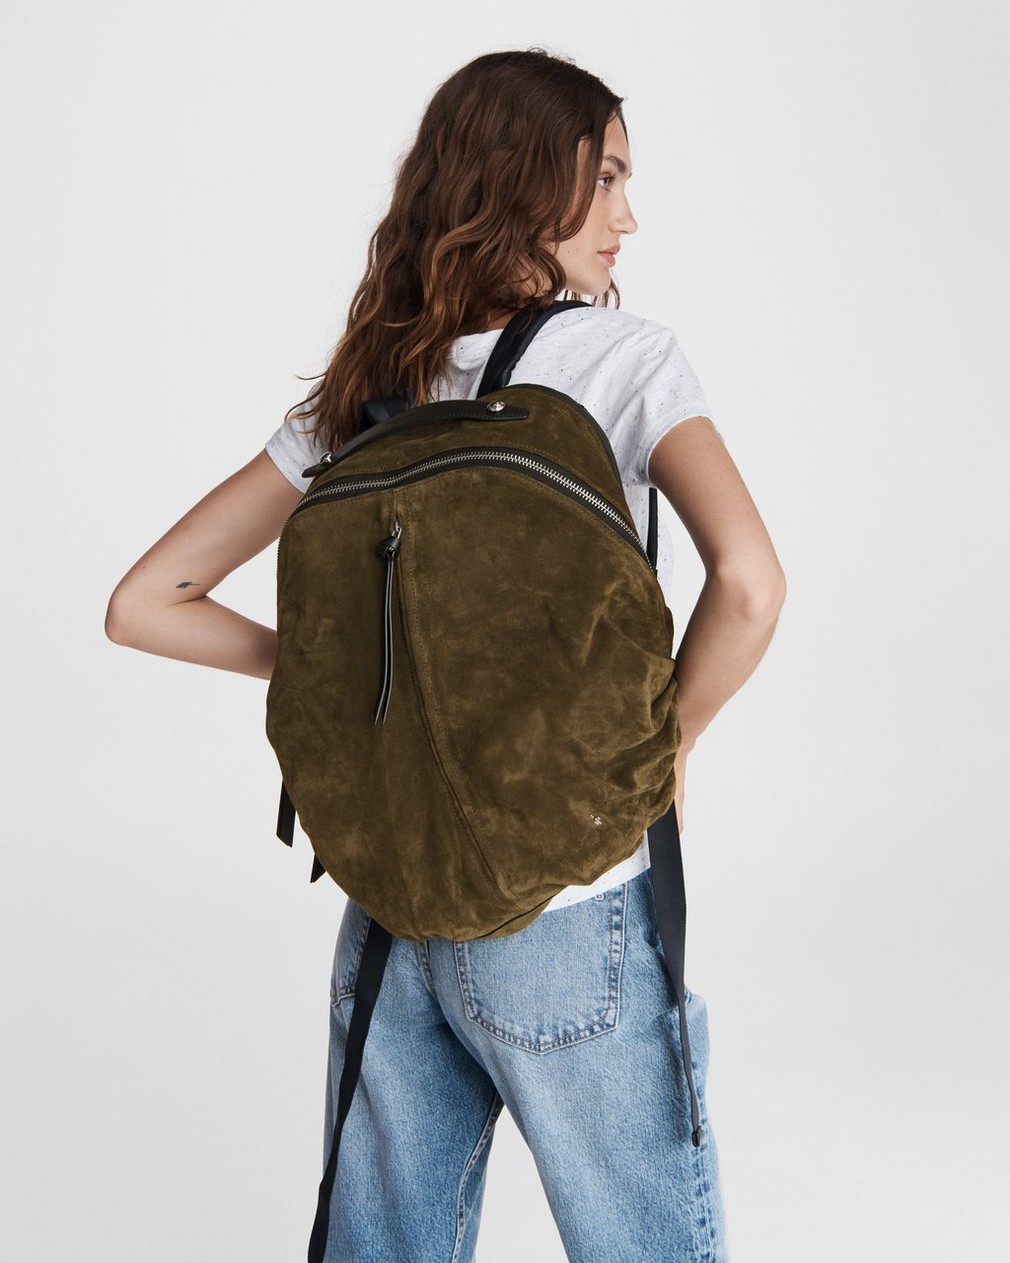 Commuter Backpack - Suede